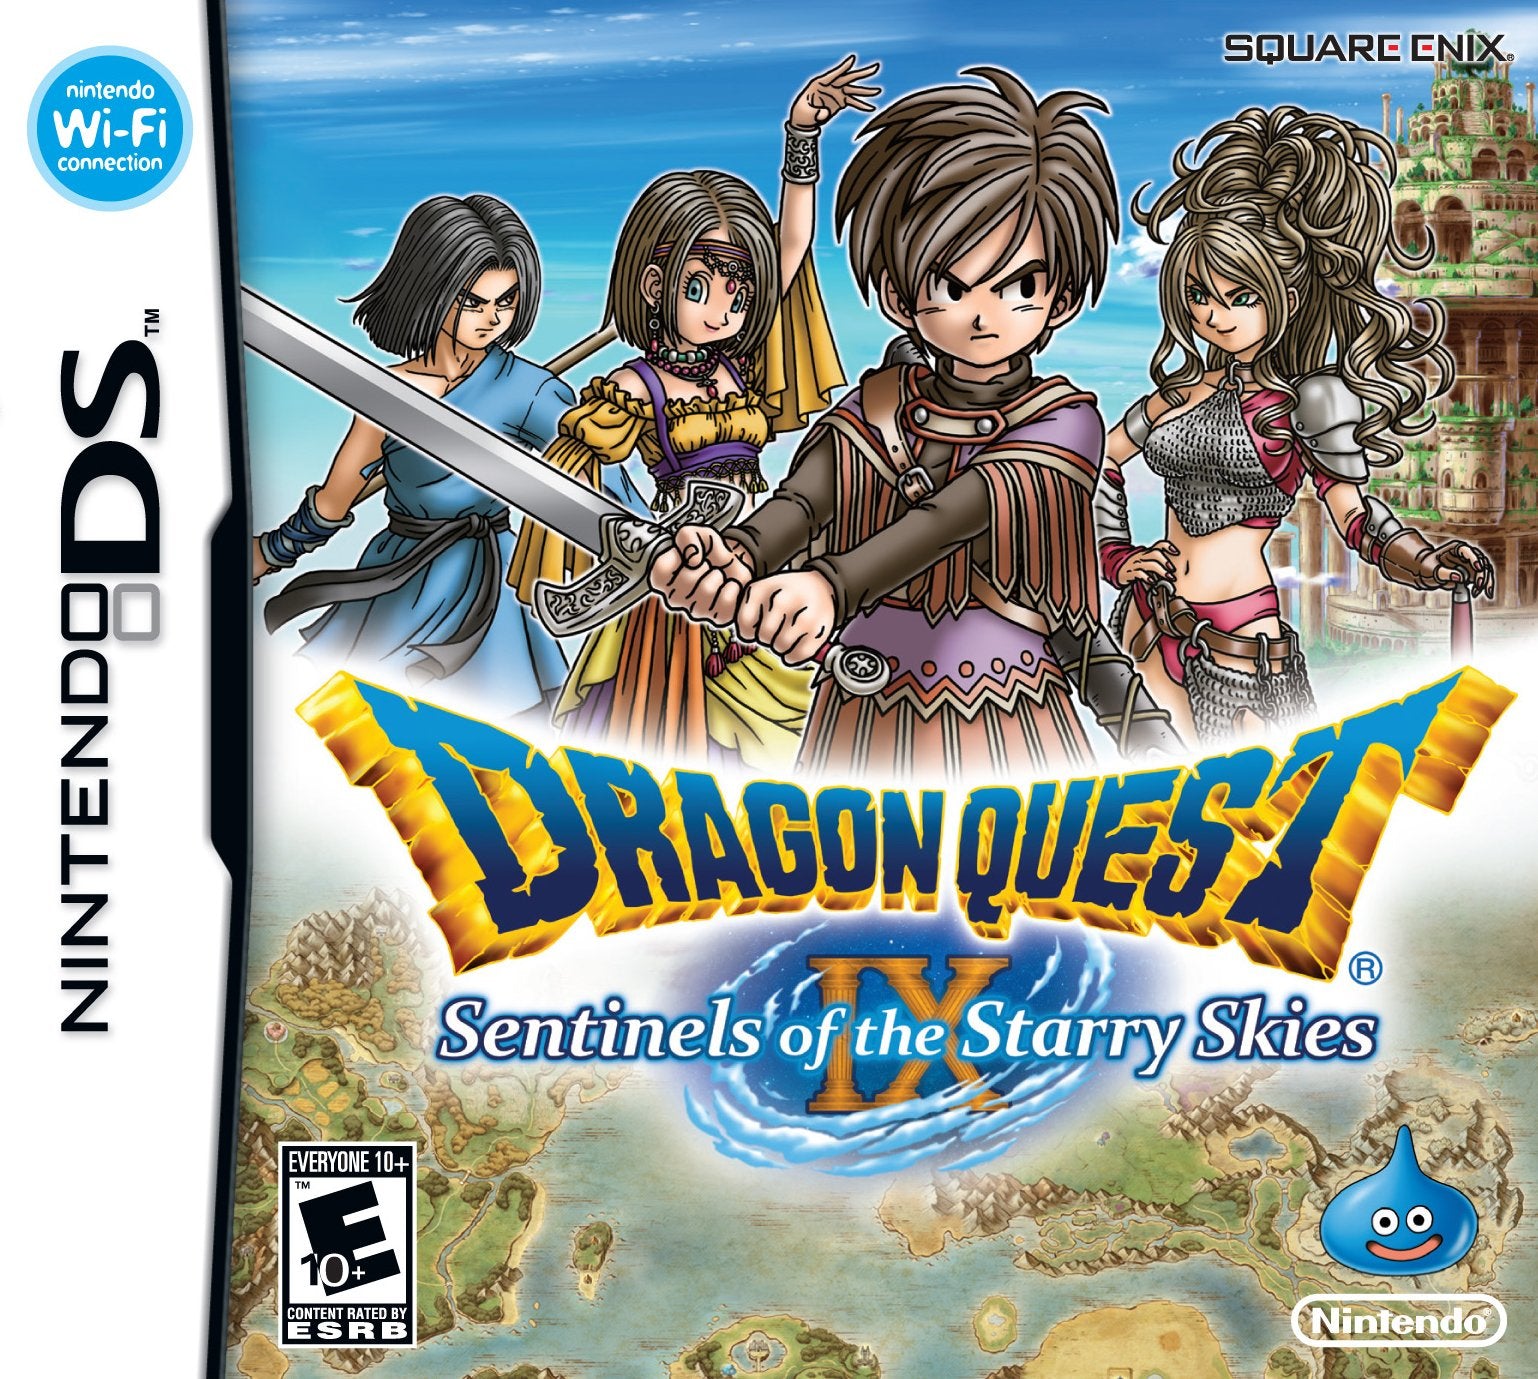 Game Nintendo Ds Dragon Quest Ix Sentinels Of The Starry Skies